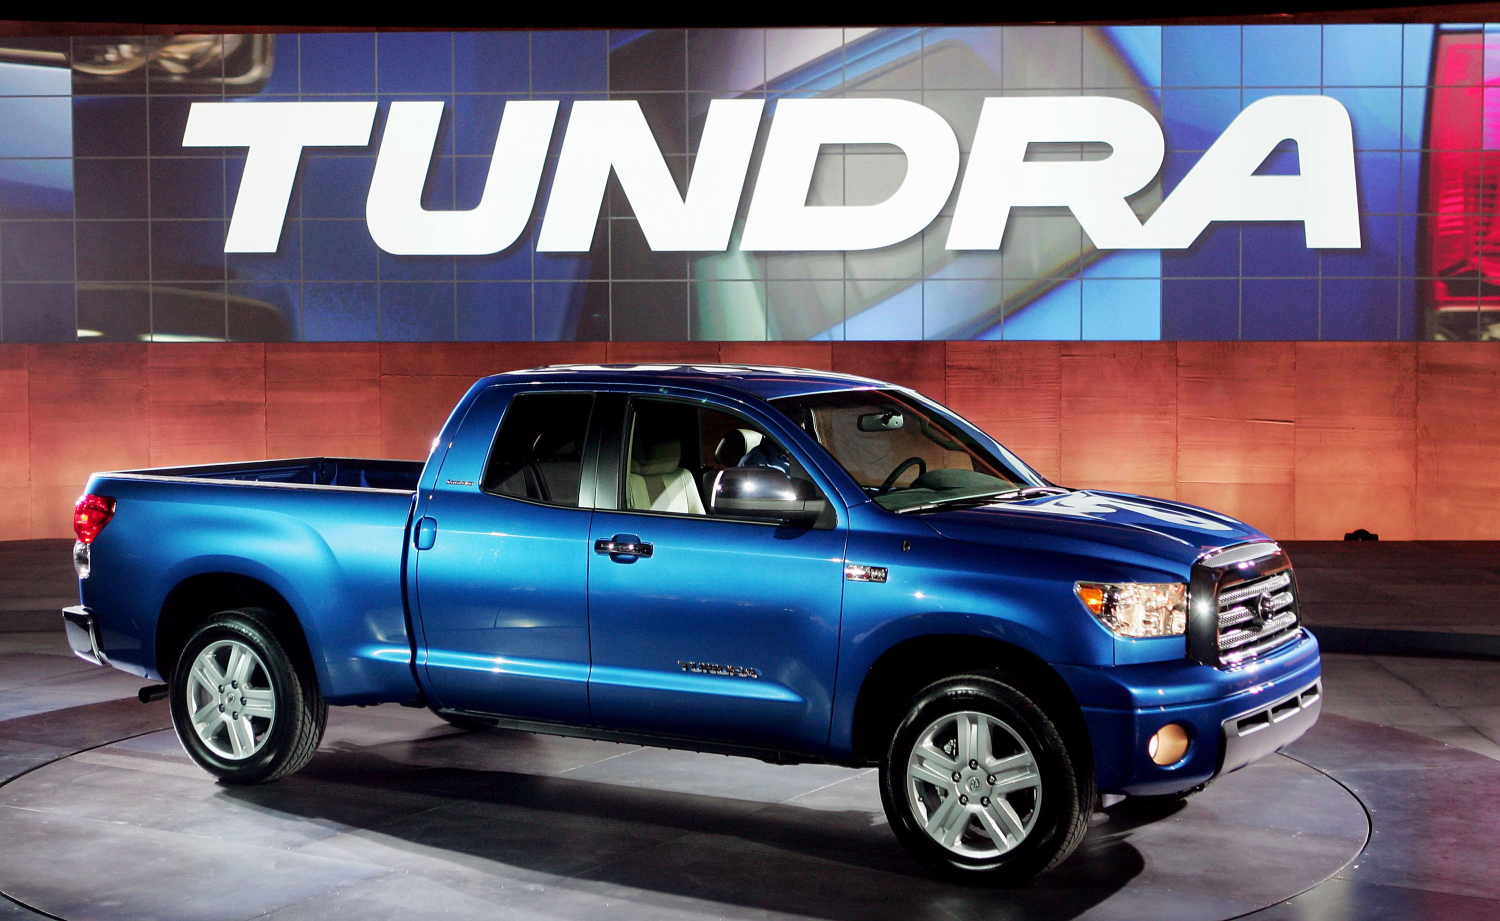 The best used Toyota Tundra pickup truck years